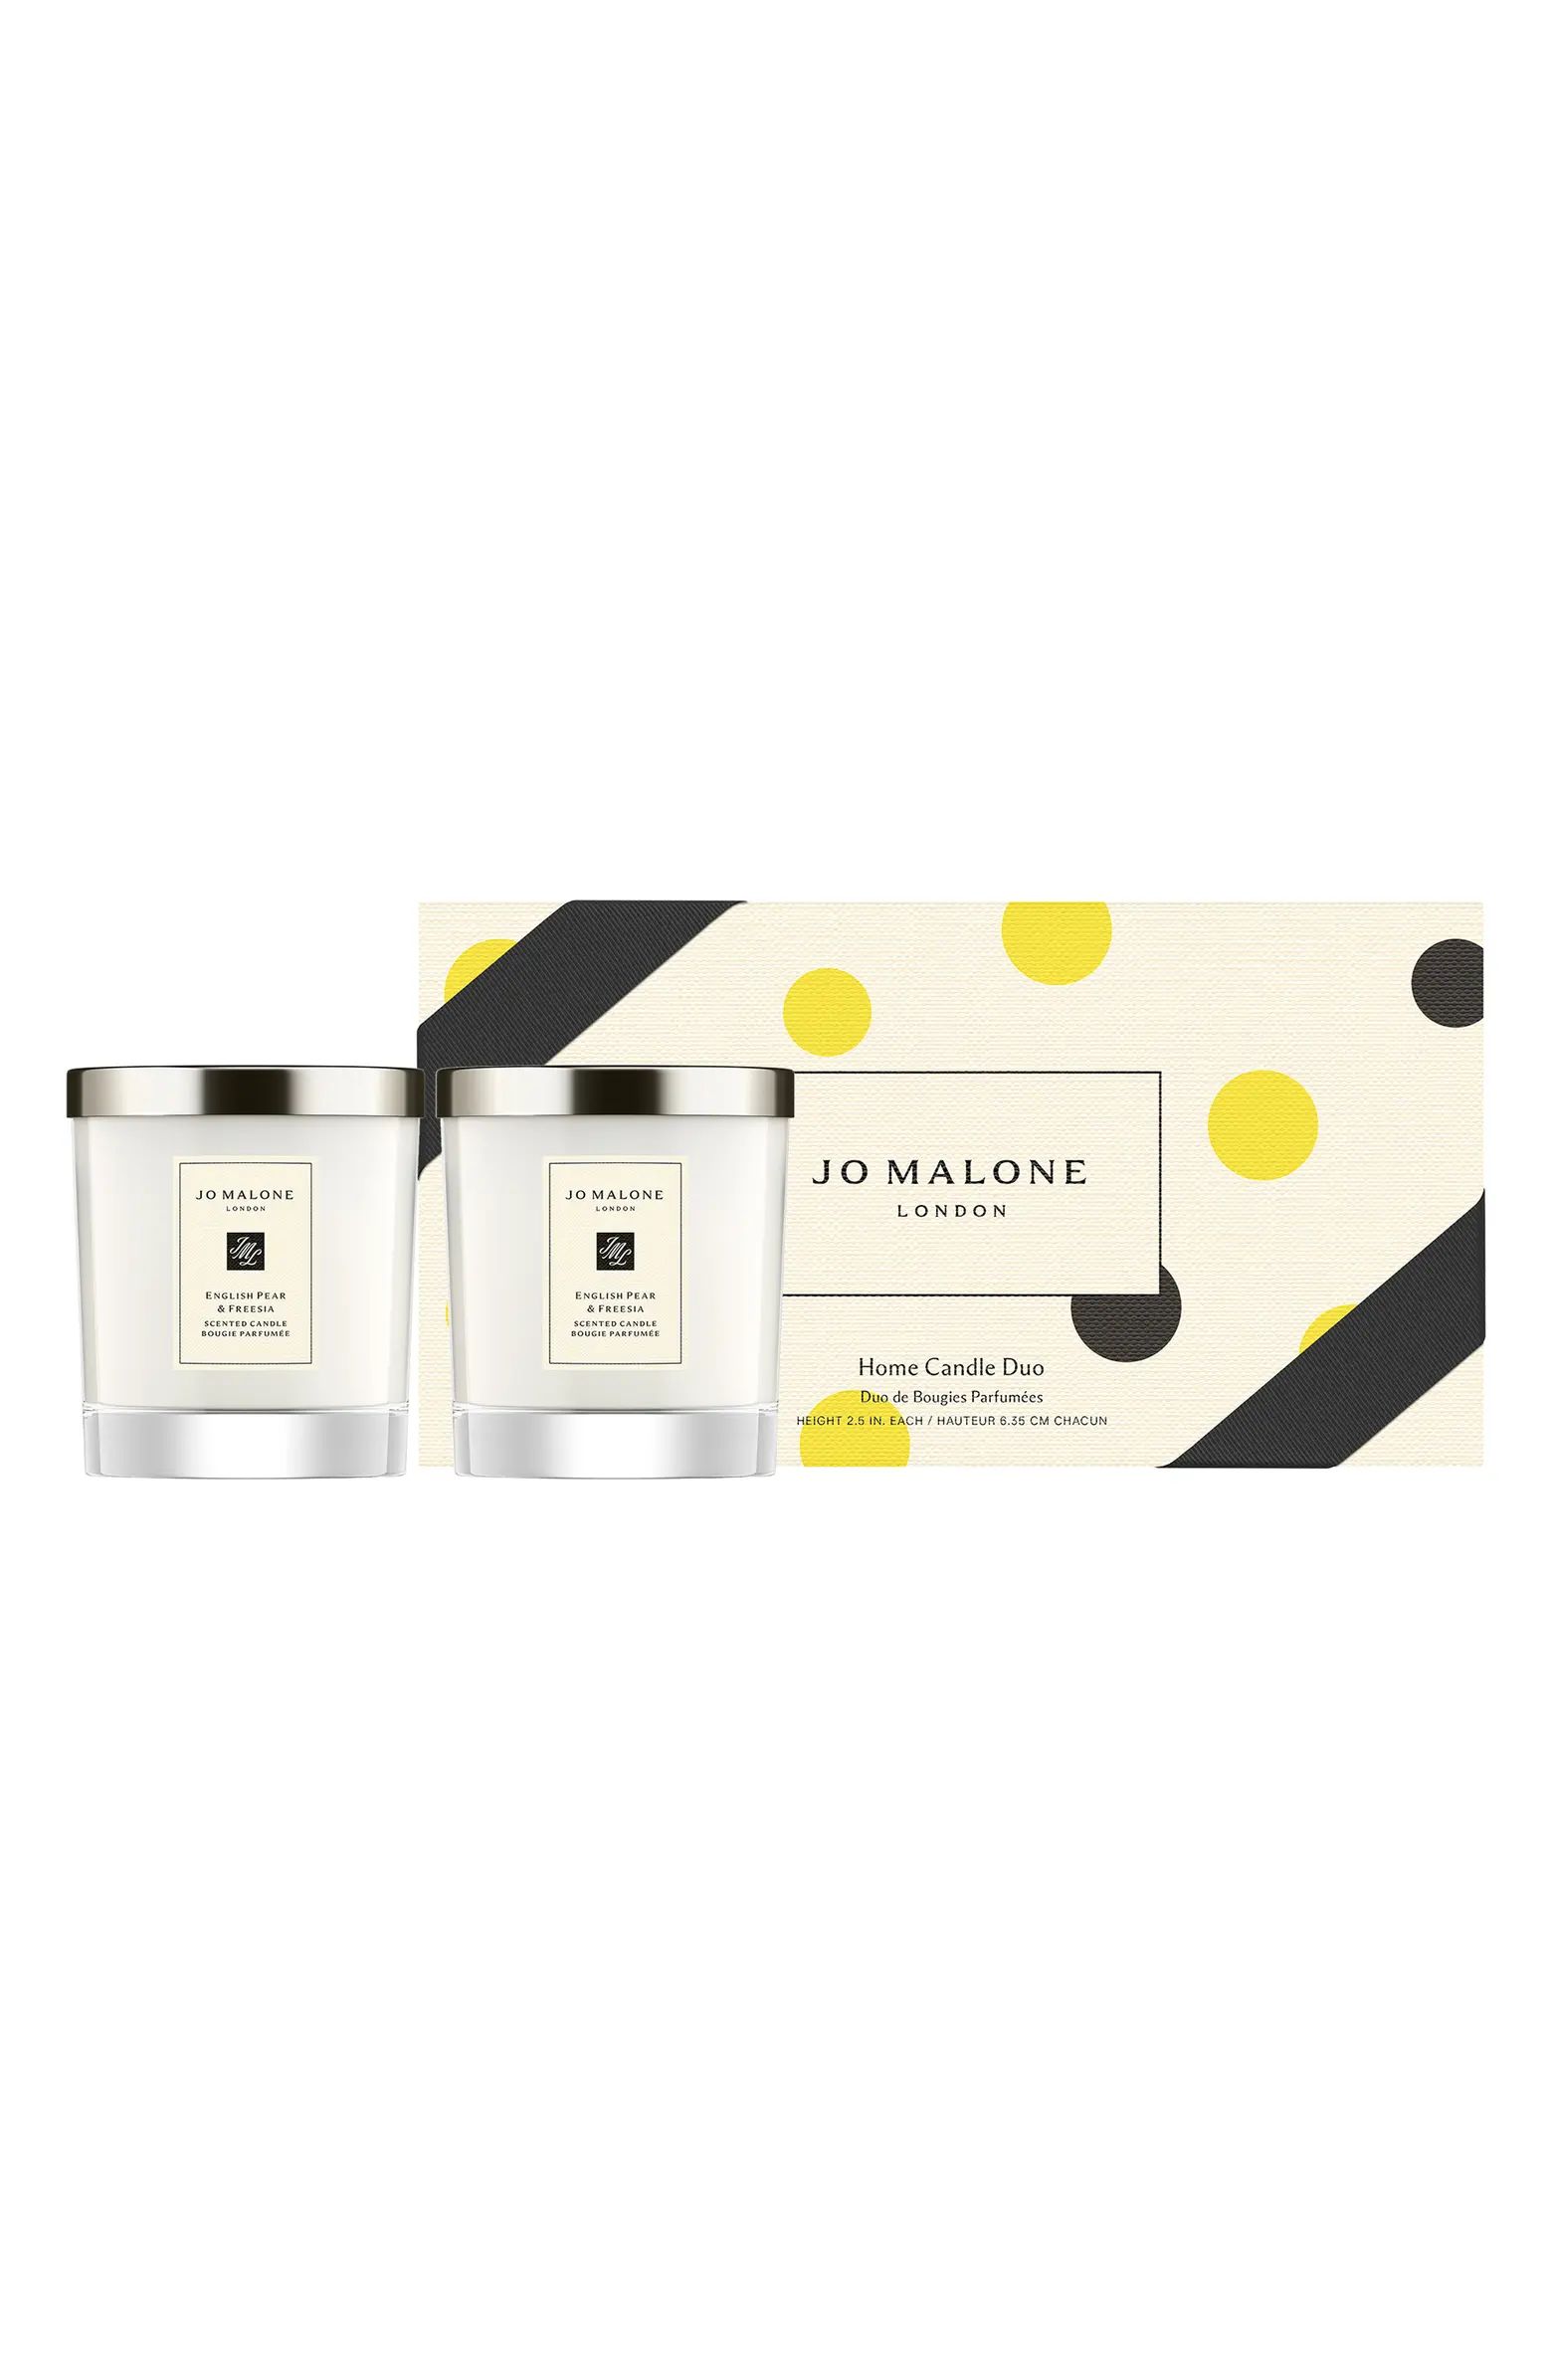 English Pear & Freesia Scented Home Candle Duo Set USD $150 Value | Nordstrom